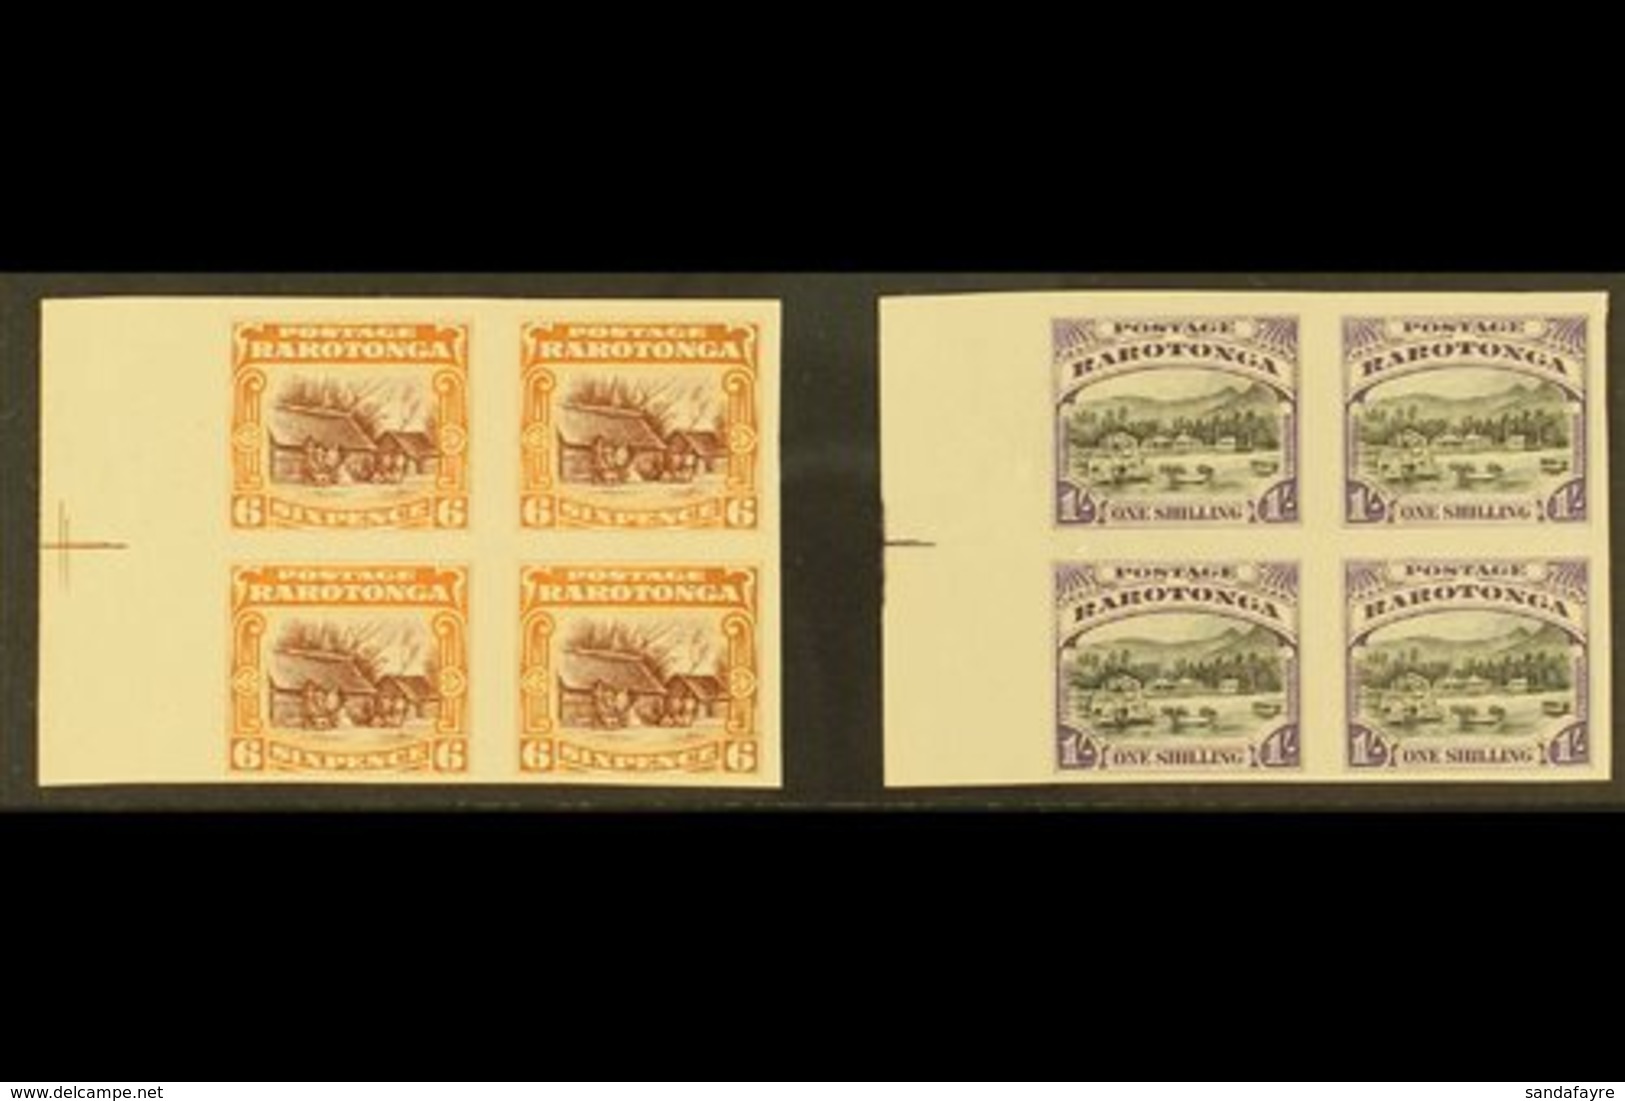 1920 Pictorial Definitive 6d And 1s (as SG 74/75) - IMPERF PLATE PROOF BLOCKS OF FOUR Printed In The Issued Colours On U - Cook